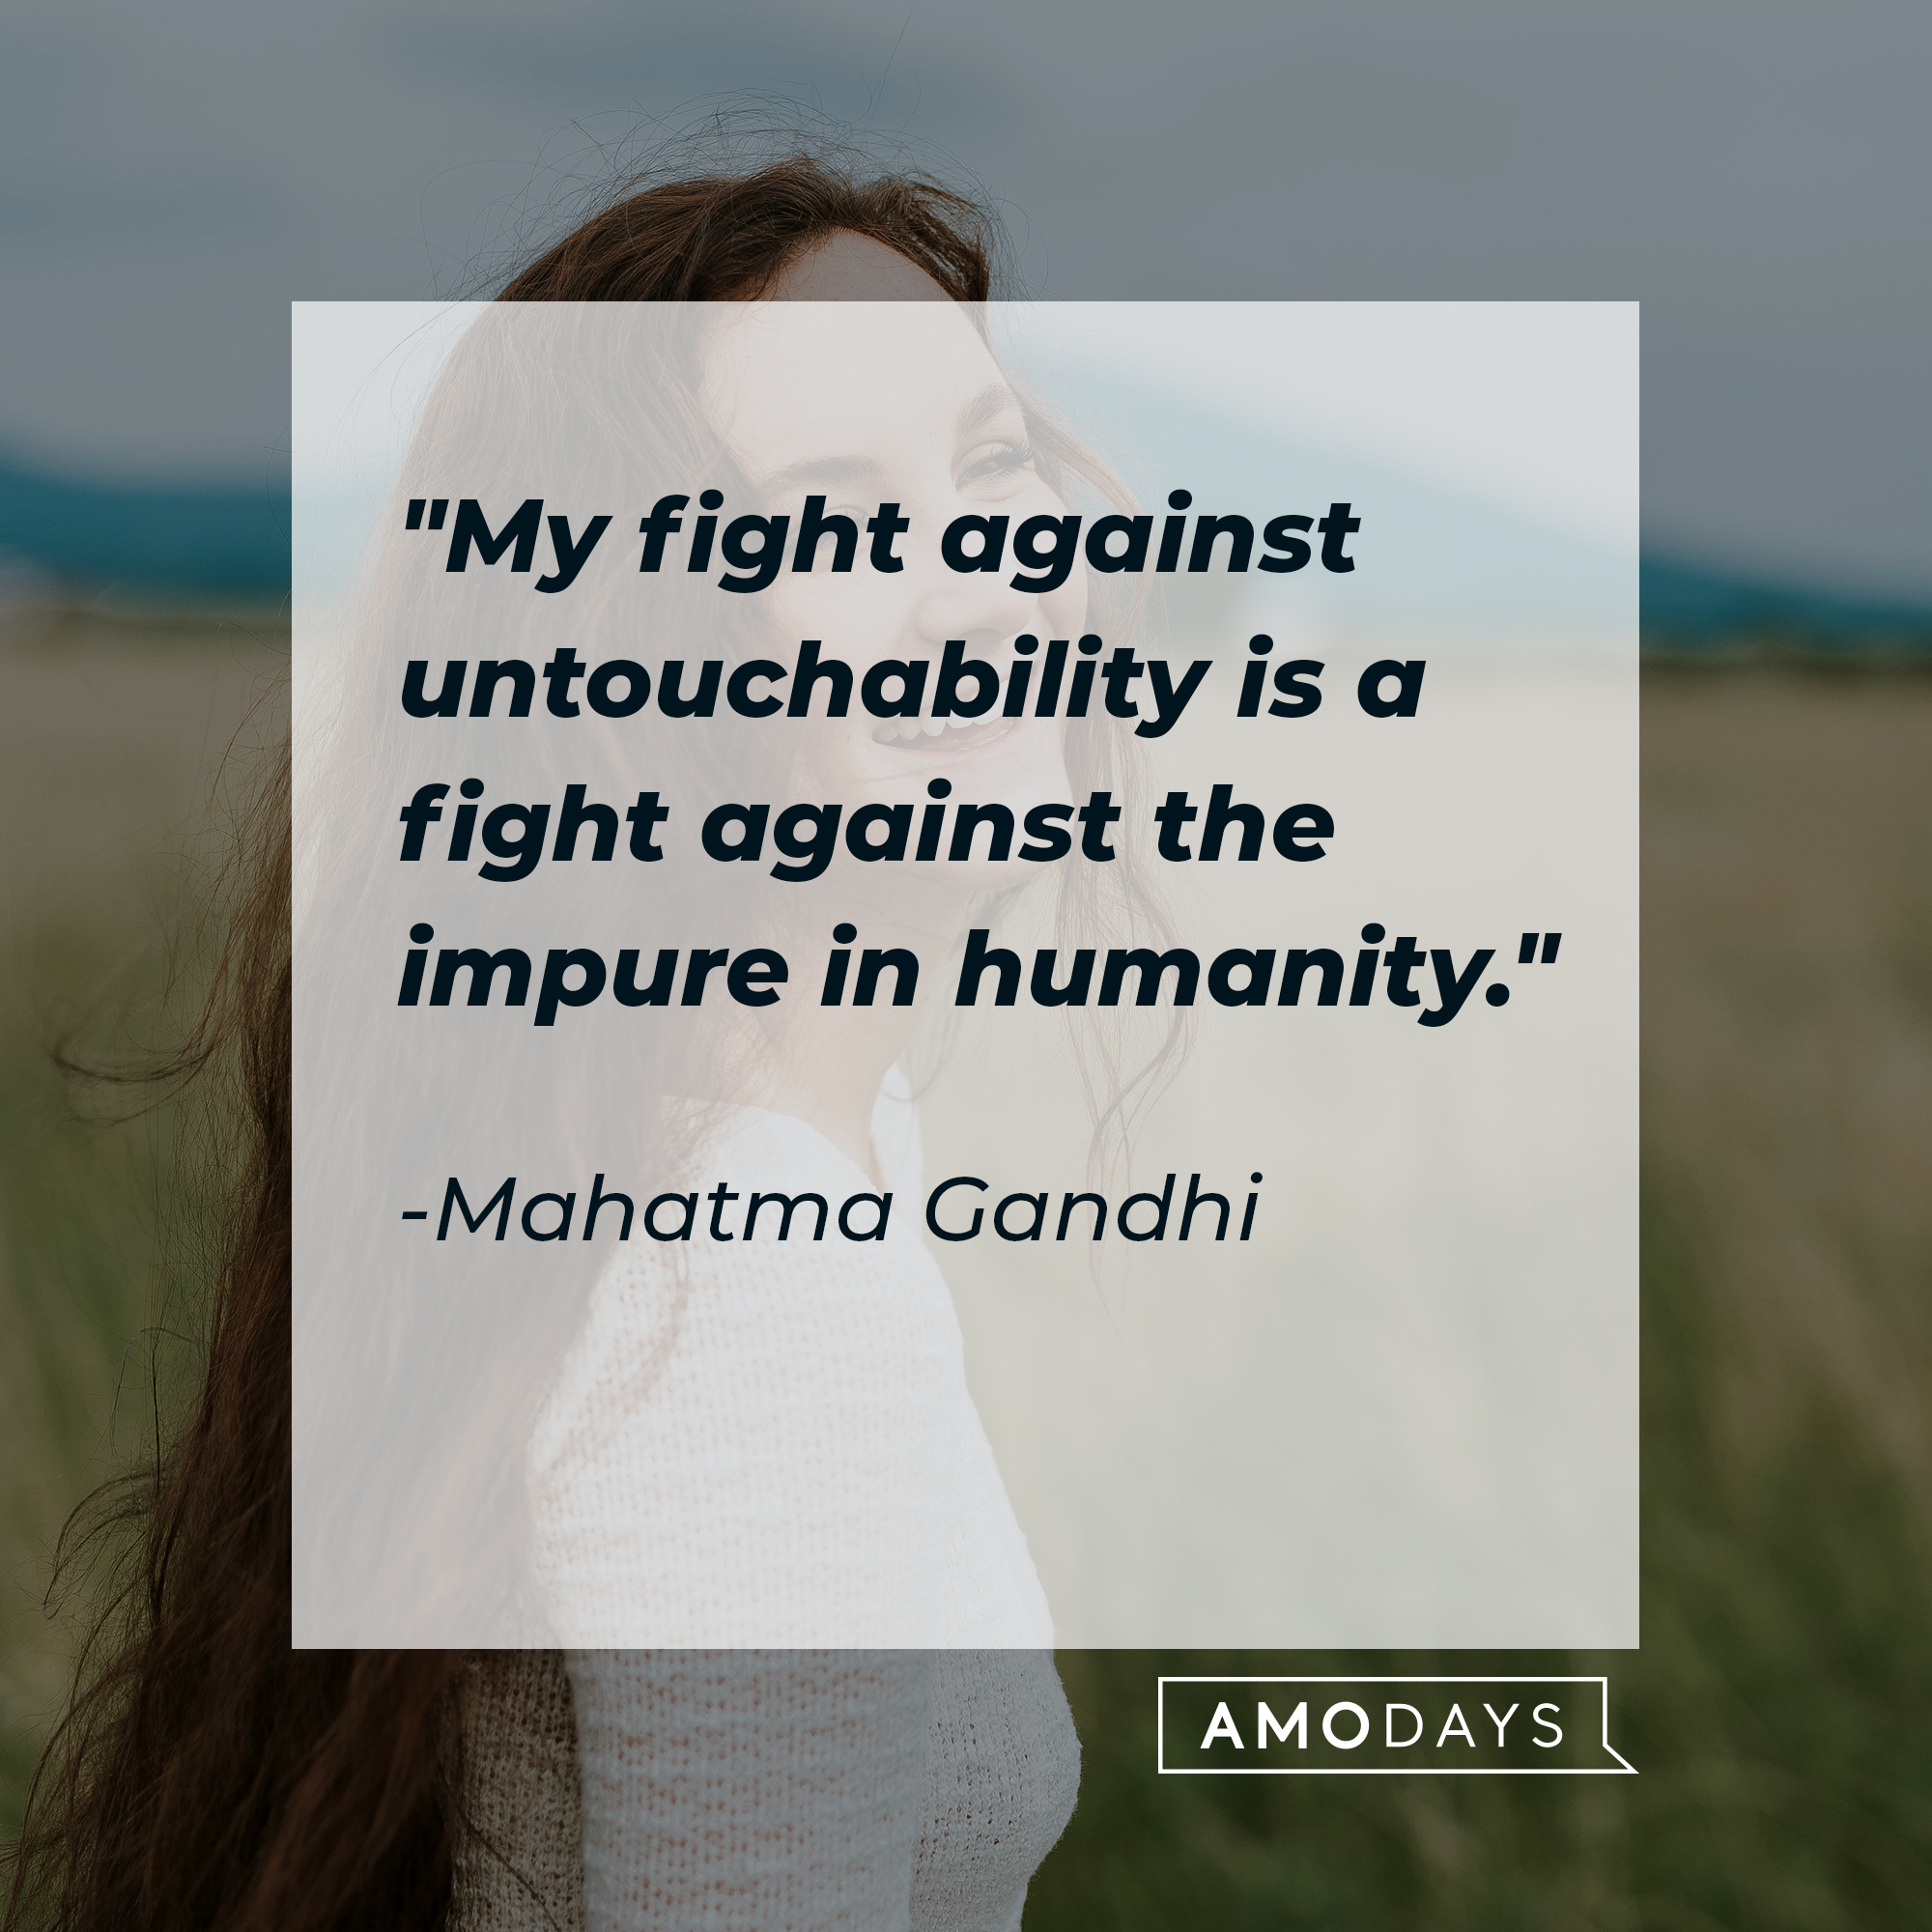 Mahatma Gandhi's quote: "My fight against untouchability is a fight against the impure in humanity." | Source: Unsplash